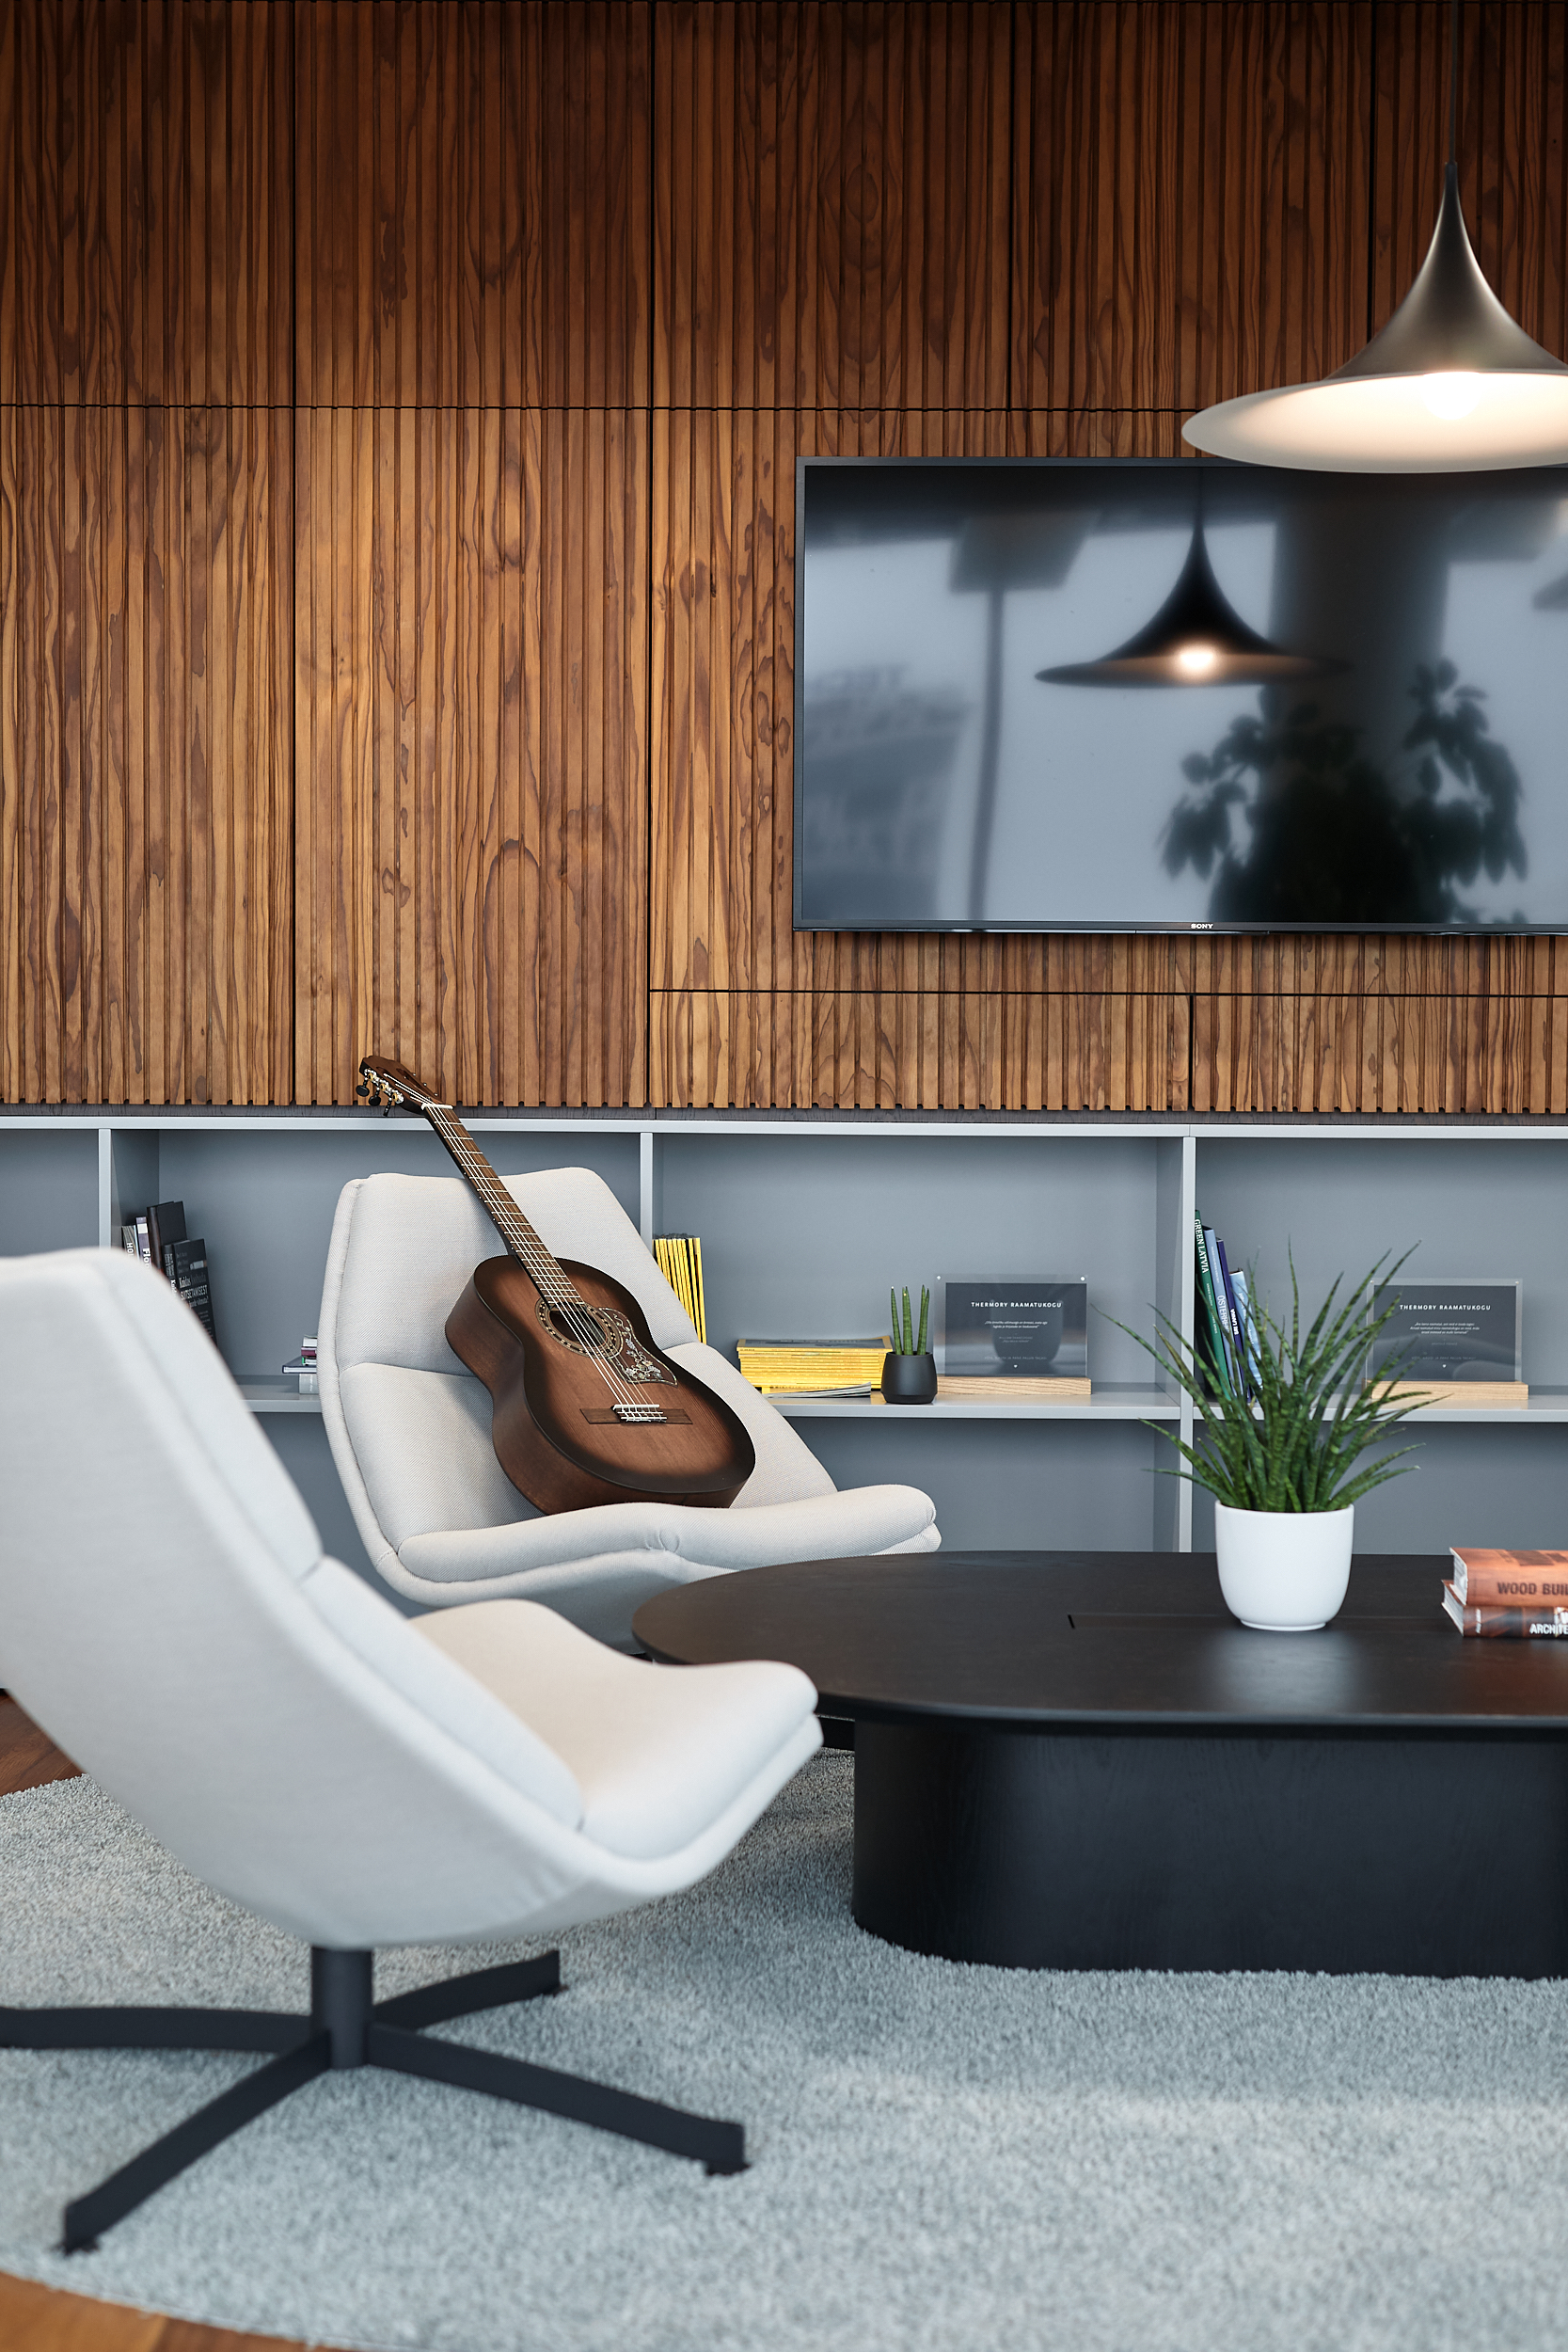 Lounge area with a guitar in Thermory office in Tallinn